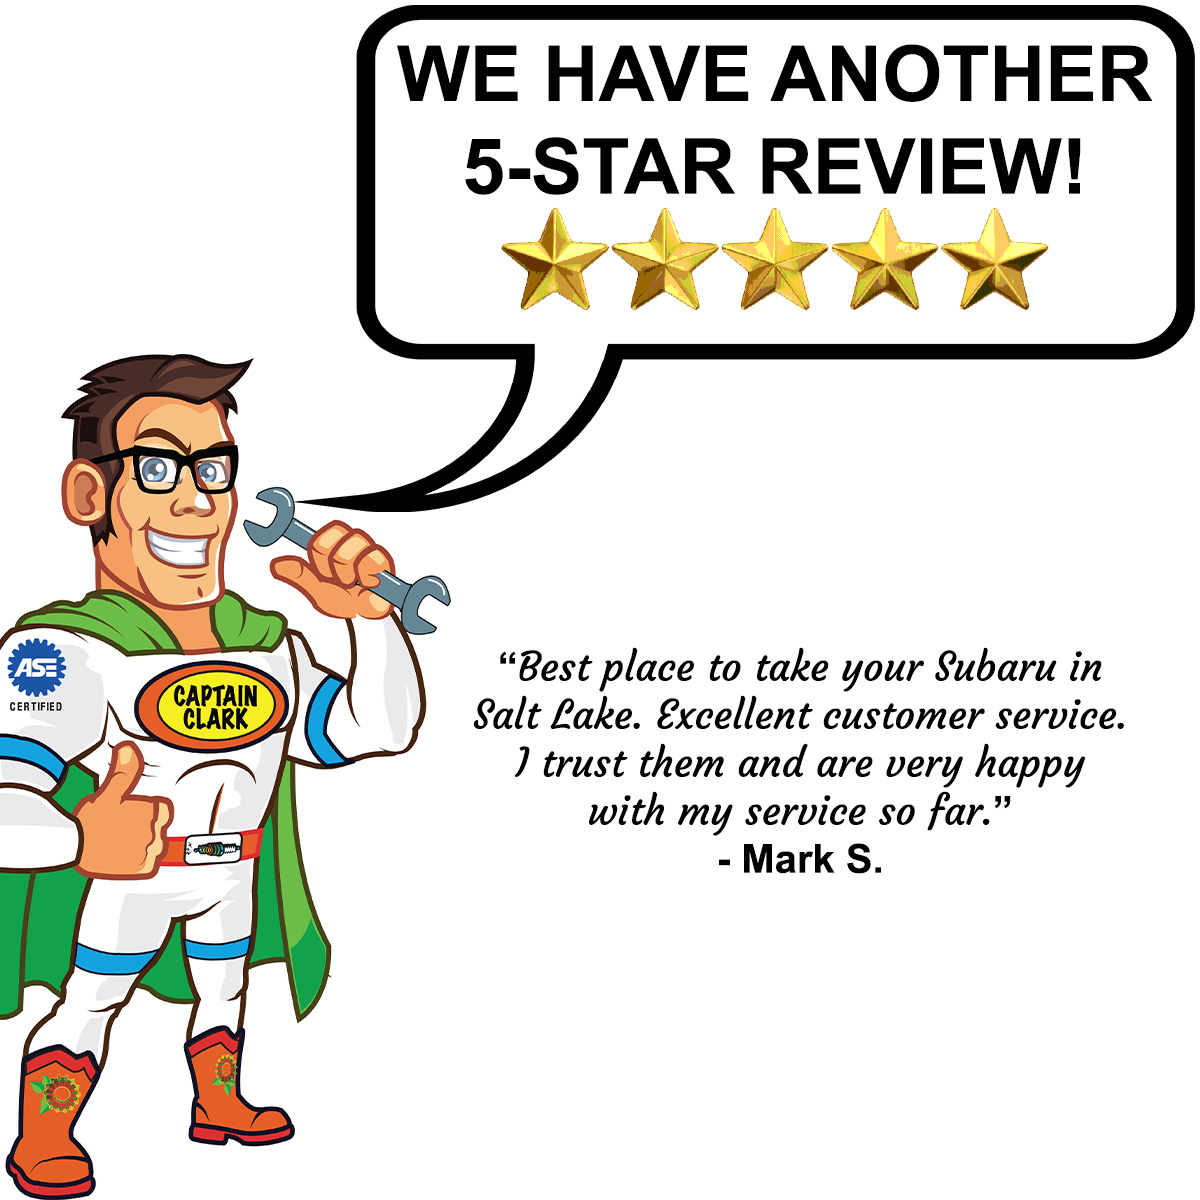 Best place to take your Subaru in Salt Lake. Excellent customer service. I trust them and are very happy with my service so far.
-
#ClarksAuto #MegaSubieShop #ClarksAutoFix #ClarksSubaruFix #Subaru